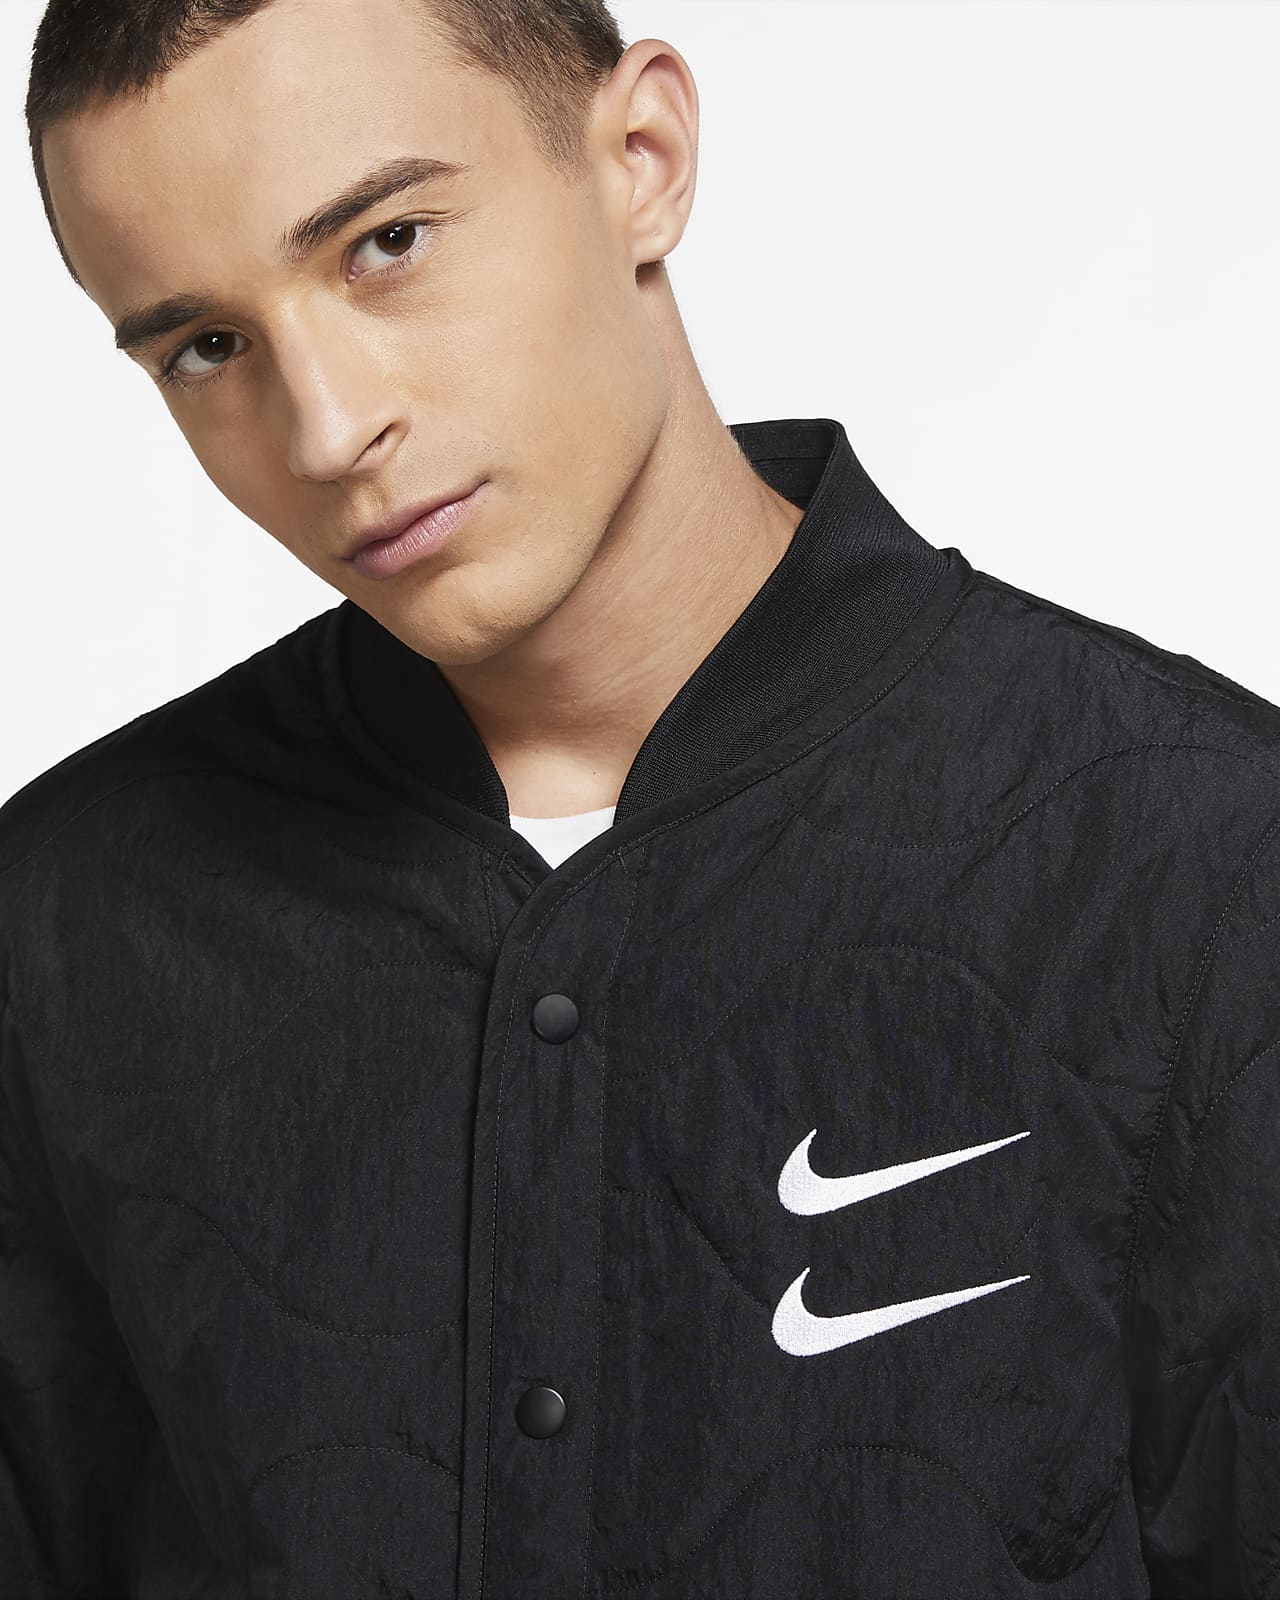 quilted nike jacket